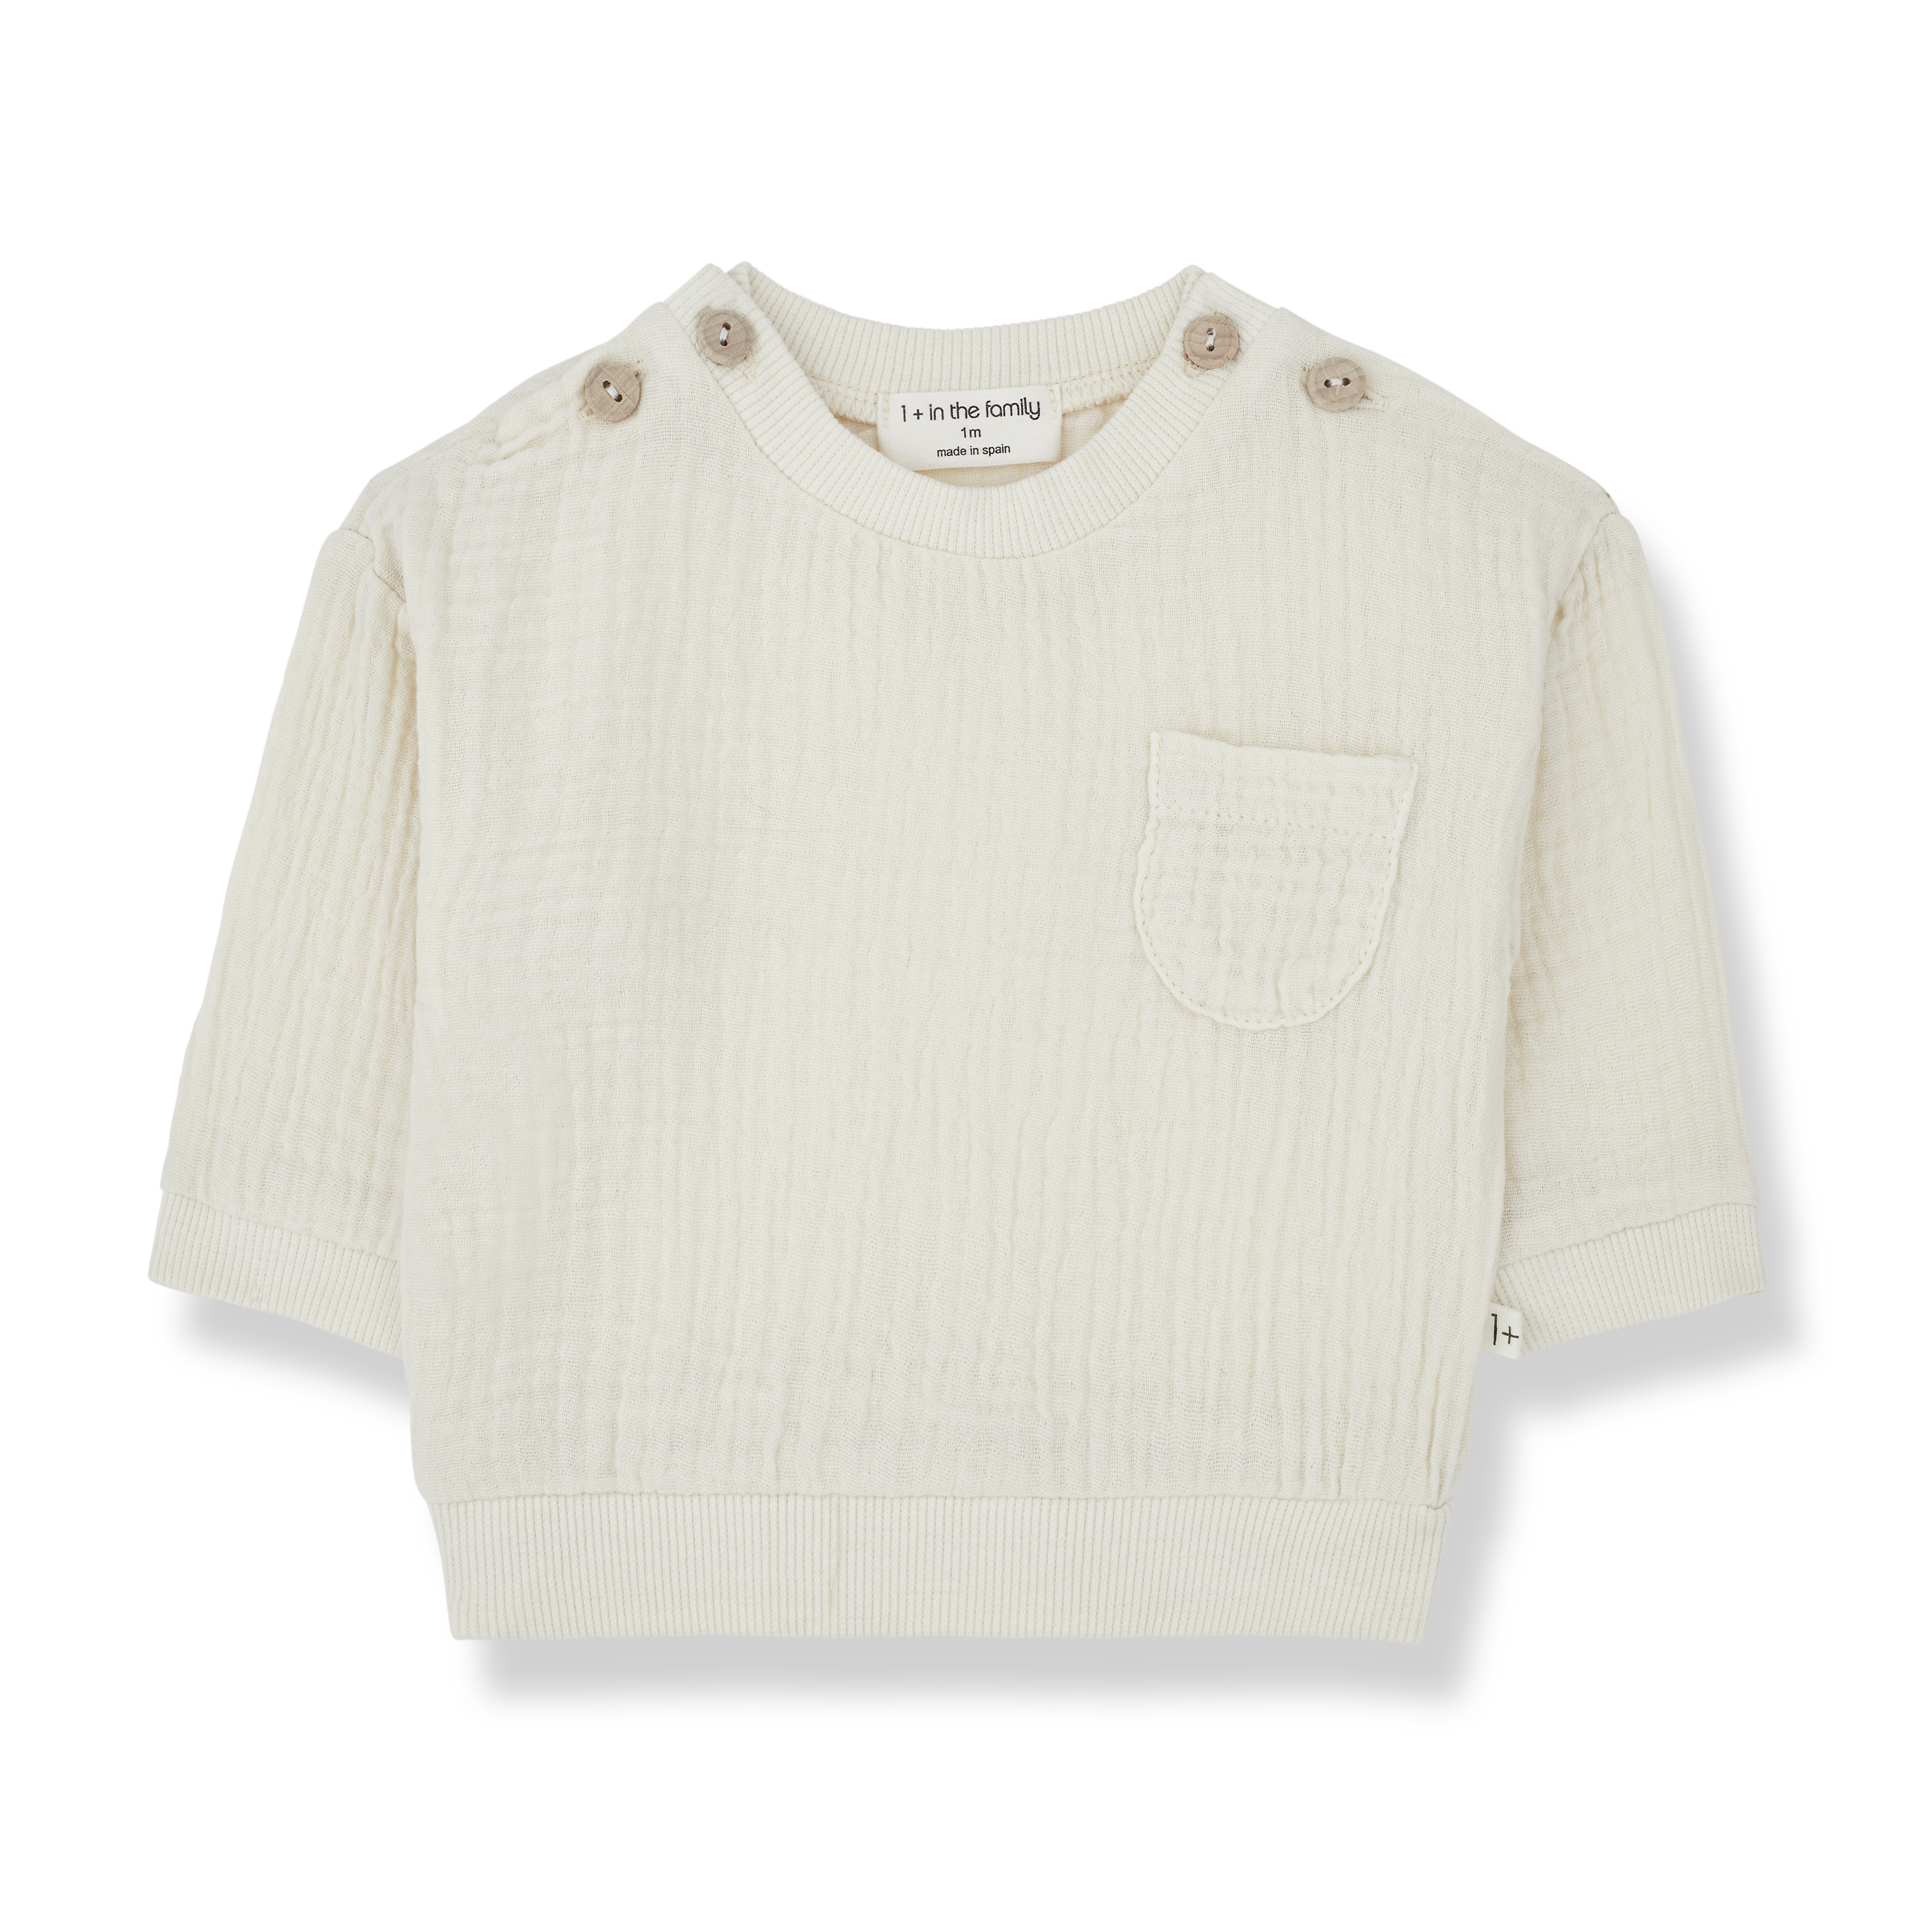 1+ in the family - lorenzo - muslin sweater - ivory